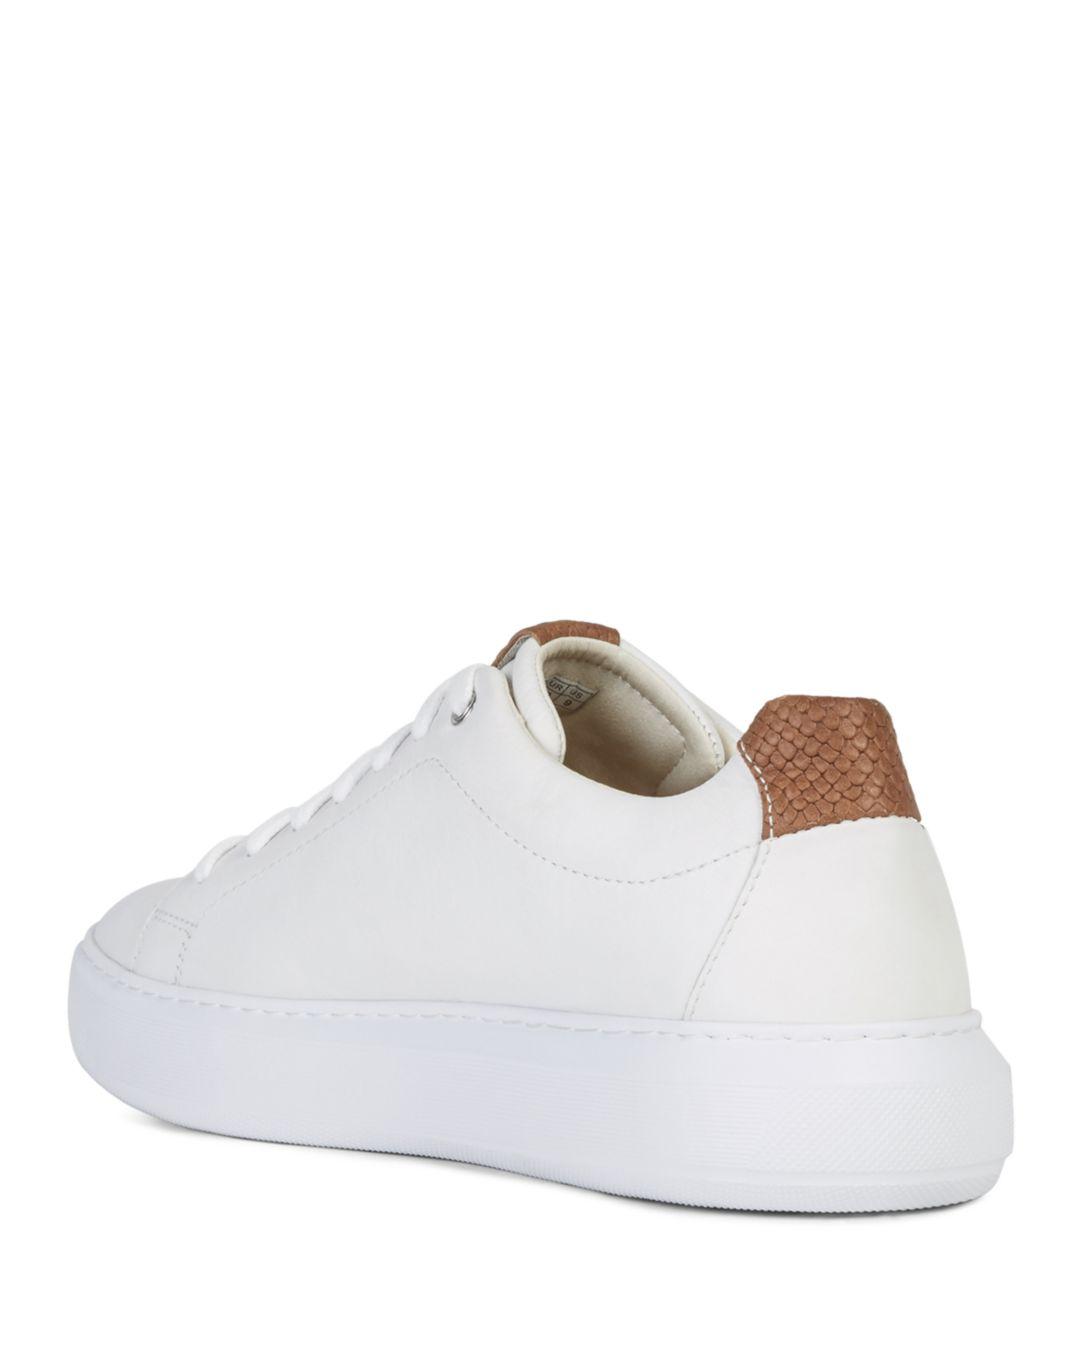 Geox Leather Deiven Man in White for Men - Lyst